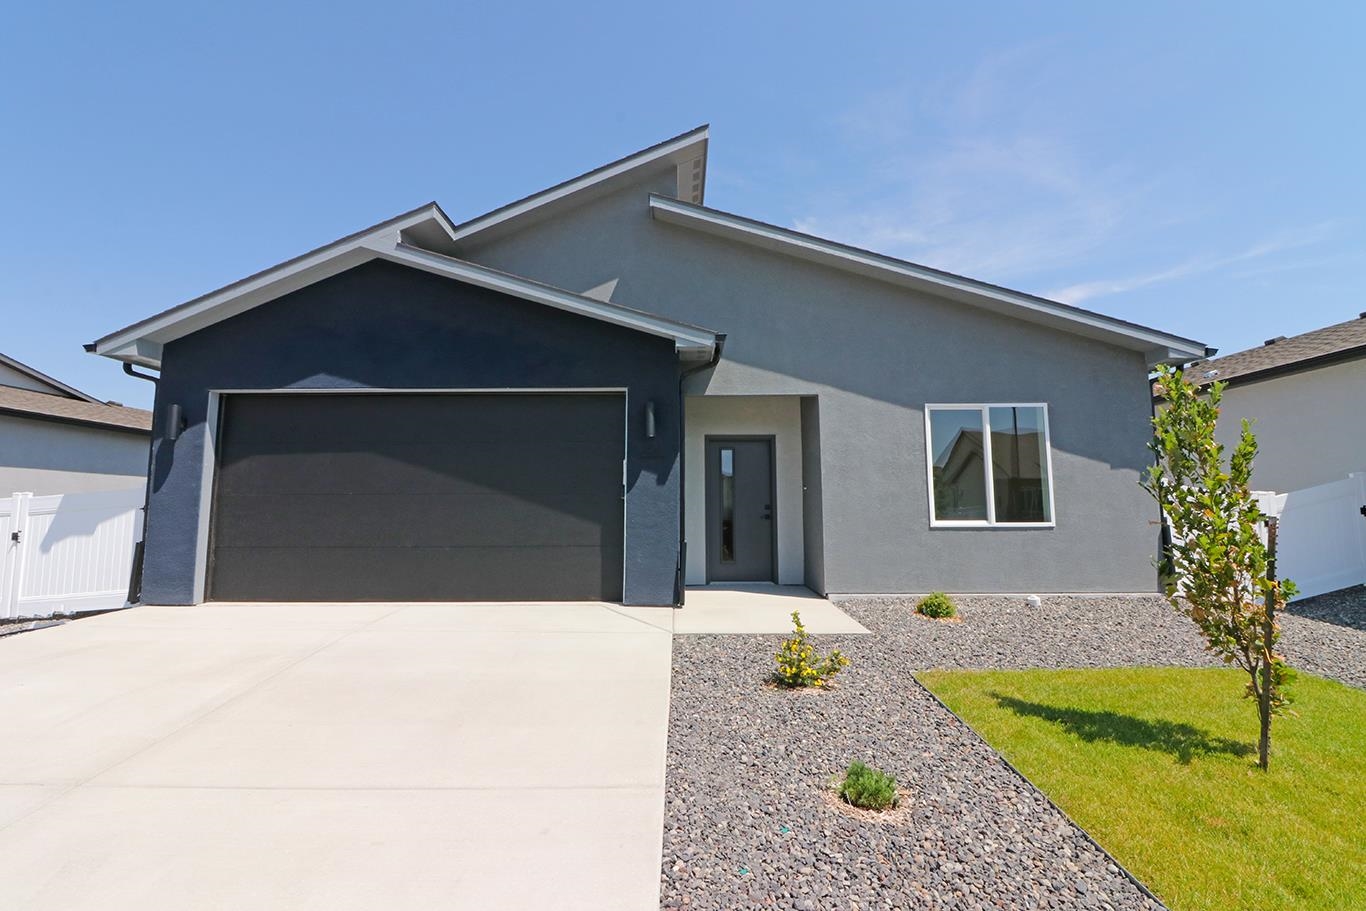 Use CRA financing to potentially save hundreds of $$ / mo on payments (Call for details).  Or use Our Builder Advantage program help you get 1% in closing costs through sellers preferred lender.  This one-of-a-kind community will have a wide variety of home types and sizes, a walking path to FMHS & easy access to both GJ & Fruita.  Pricing includes xeriscaping & fencing.  These well-planned homes offer maximum functional use of space, durable yet beautiful finishes & cute outdoor living spaces that require minimal maintenance.  3 bed, 2 bath rancher, 2 car garage, 1,484 sq. ft.